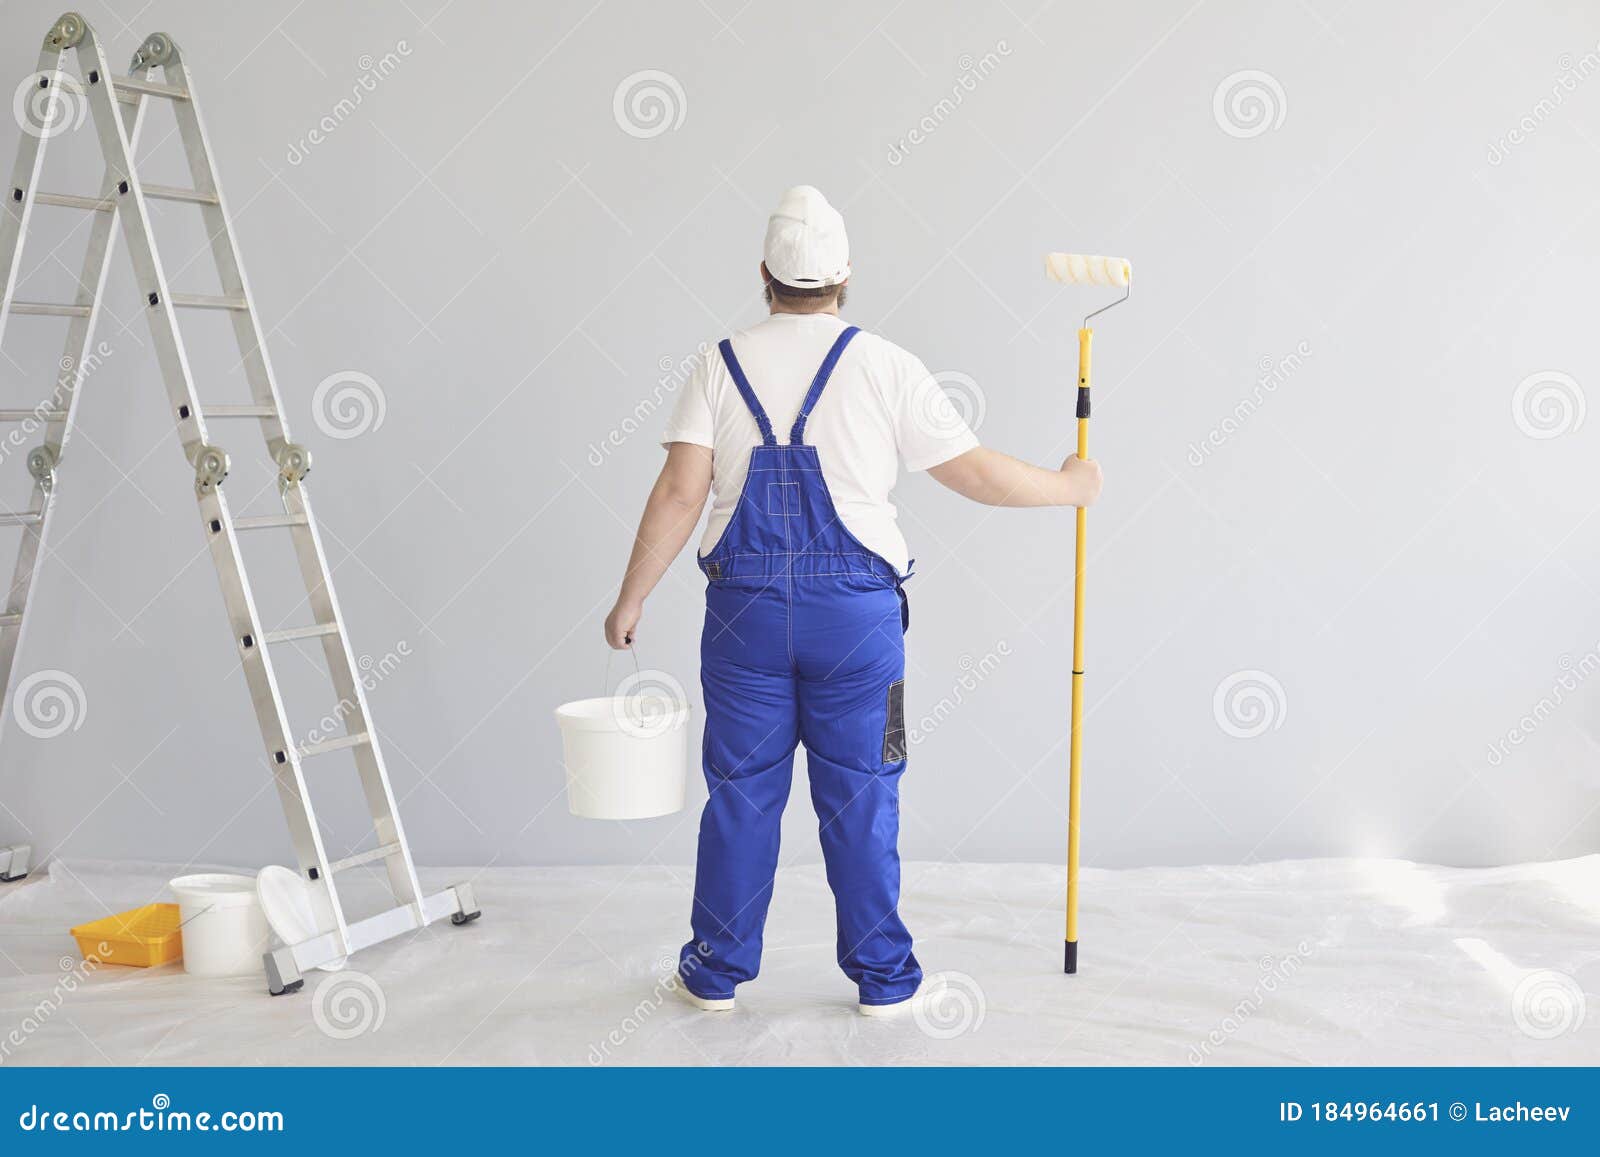 Painter Painting. Funny Male Painter with a Roller Skater Standing Paints  in the Background. Stock Image - Image of interior, humor: 184964661